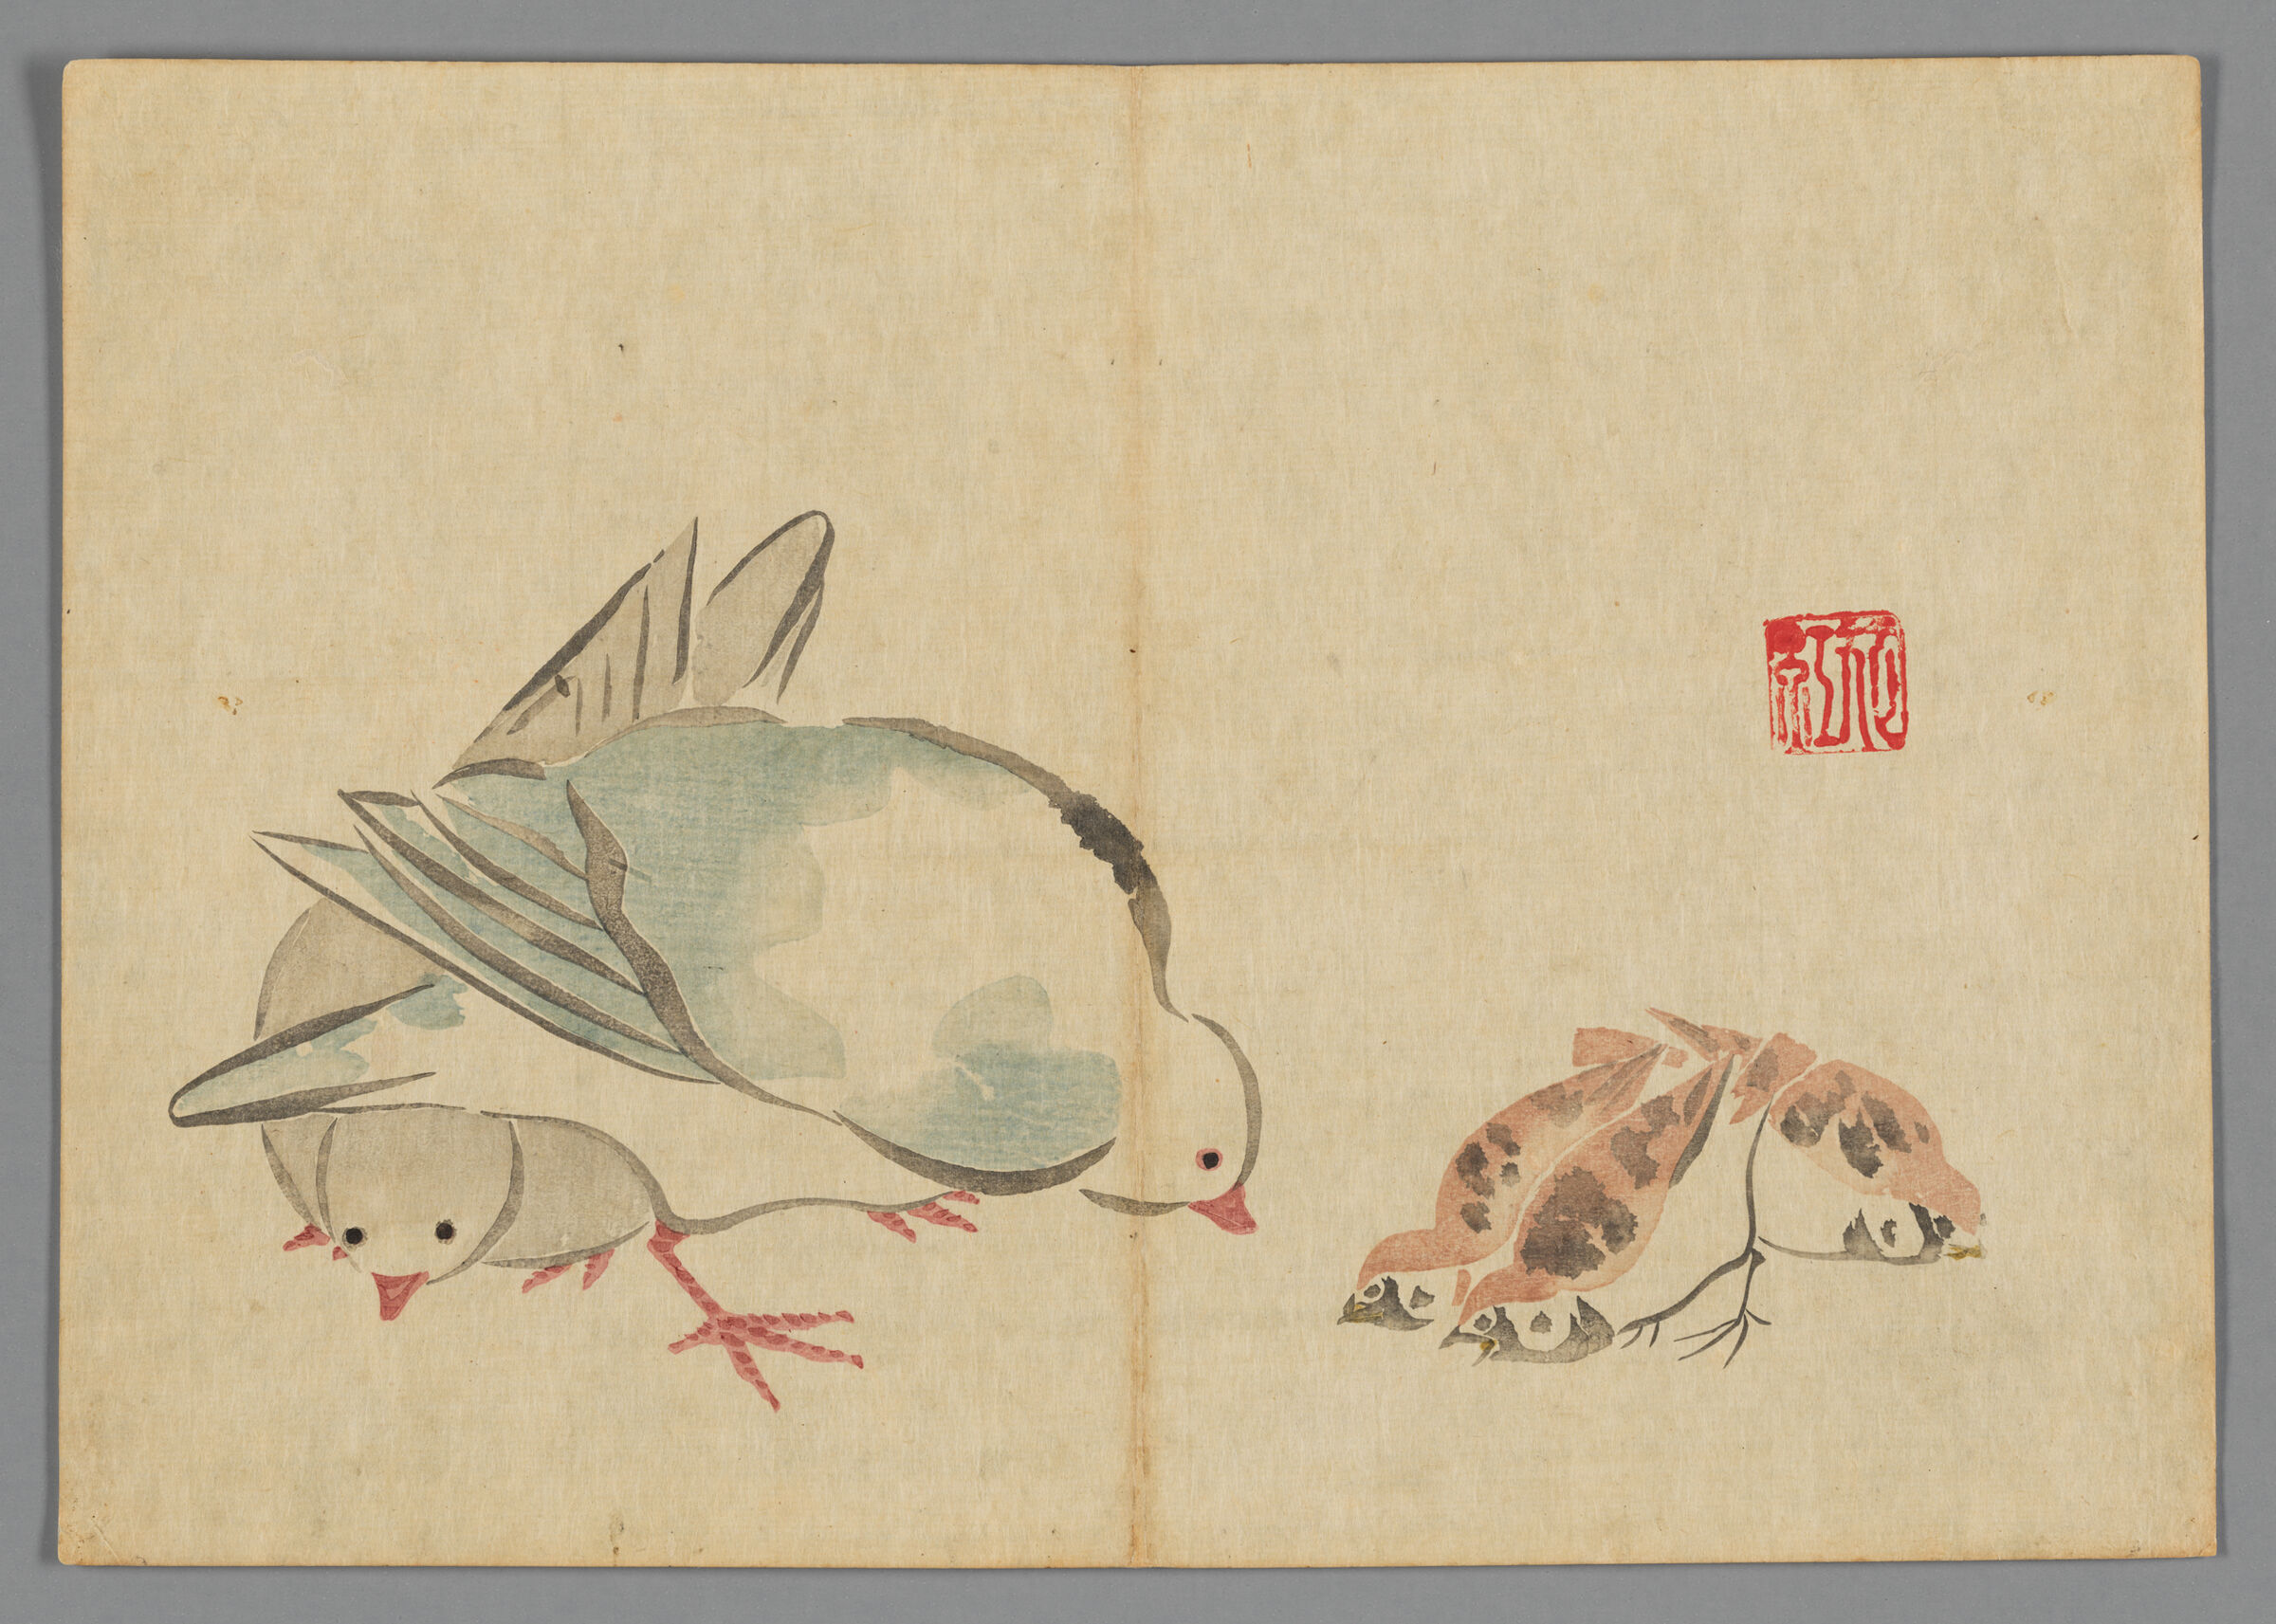 Doves And Sparrows, From The Kōrin Gafu (Kōrin Picture Album)